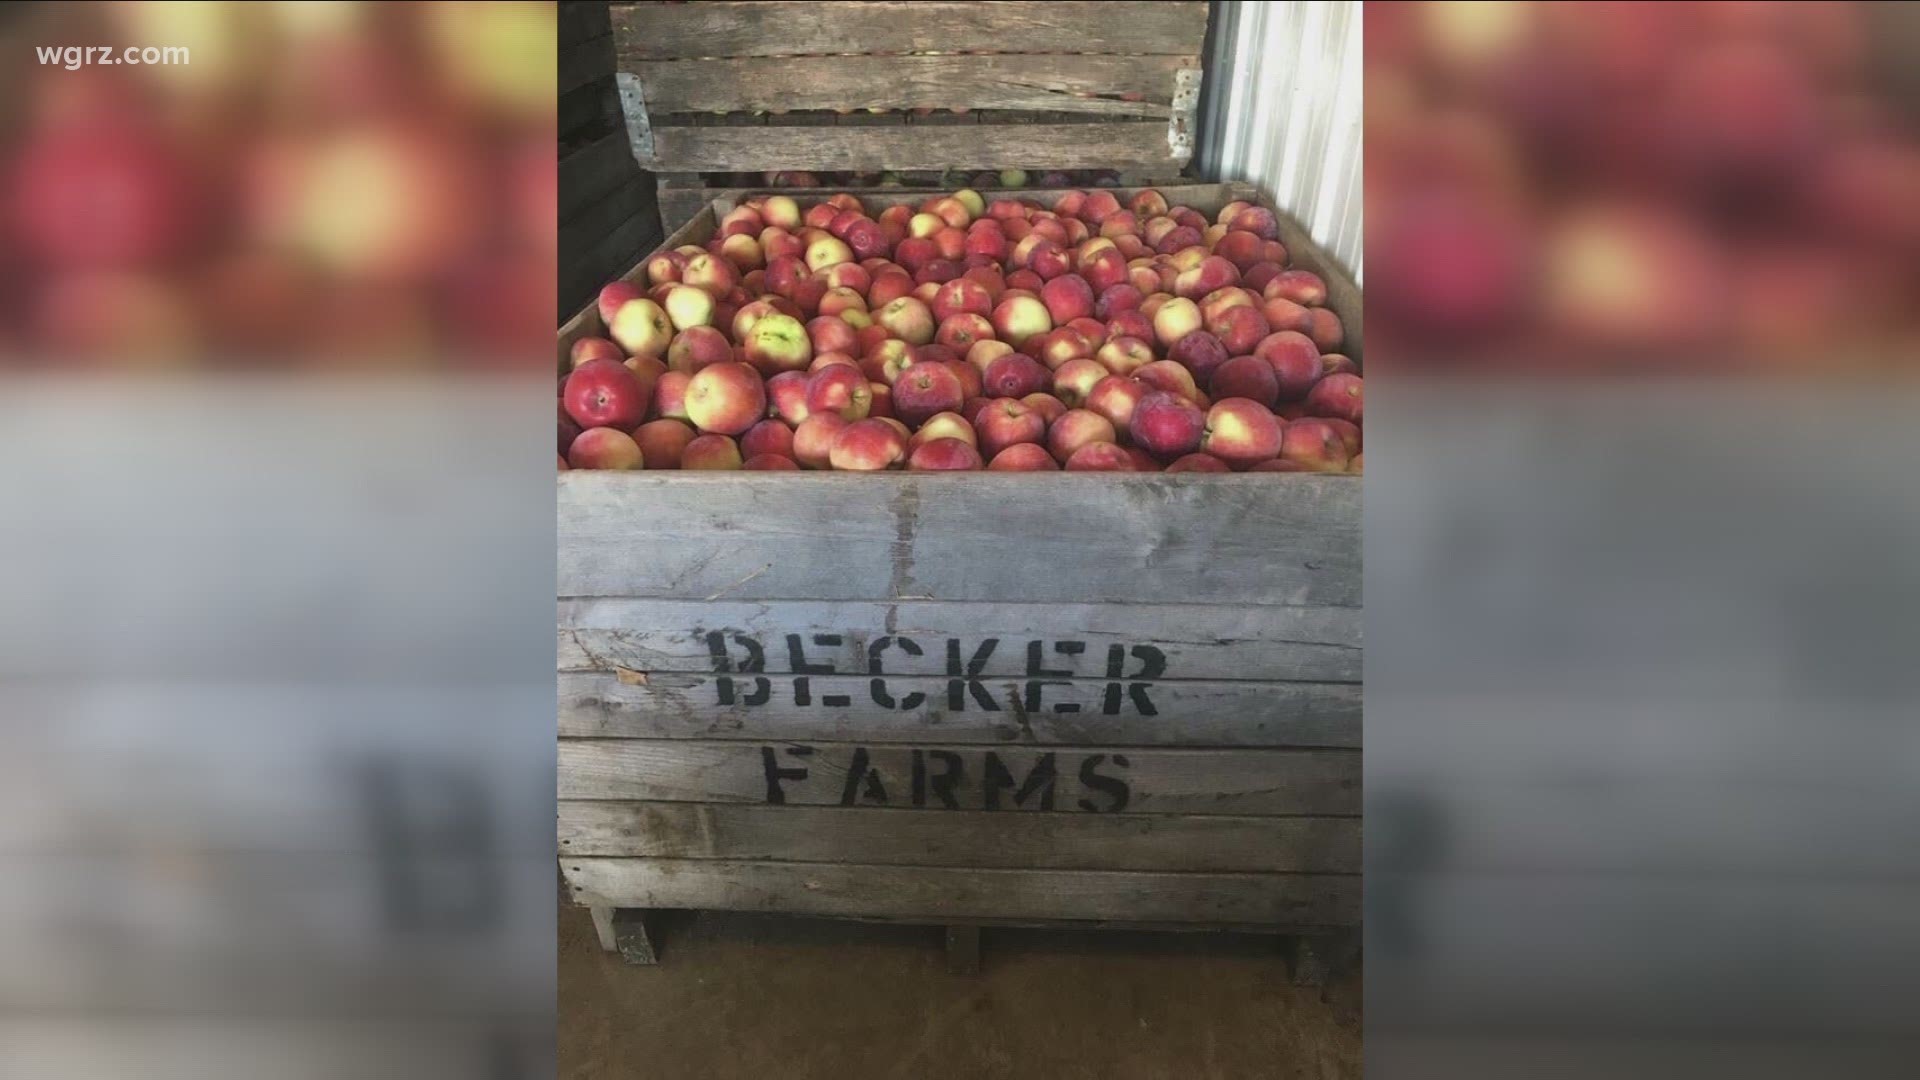 Becker Farms has been a popular autumn destination because if its apples, pumpkins and its educational tours.